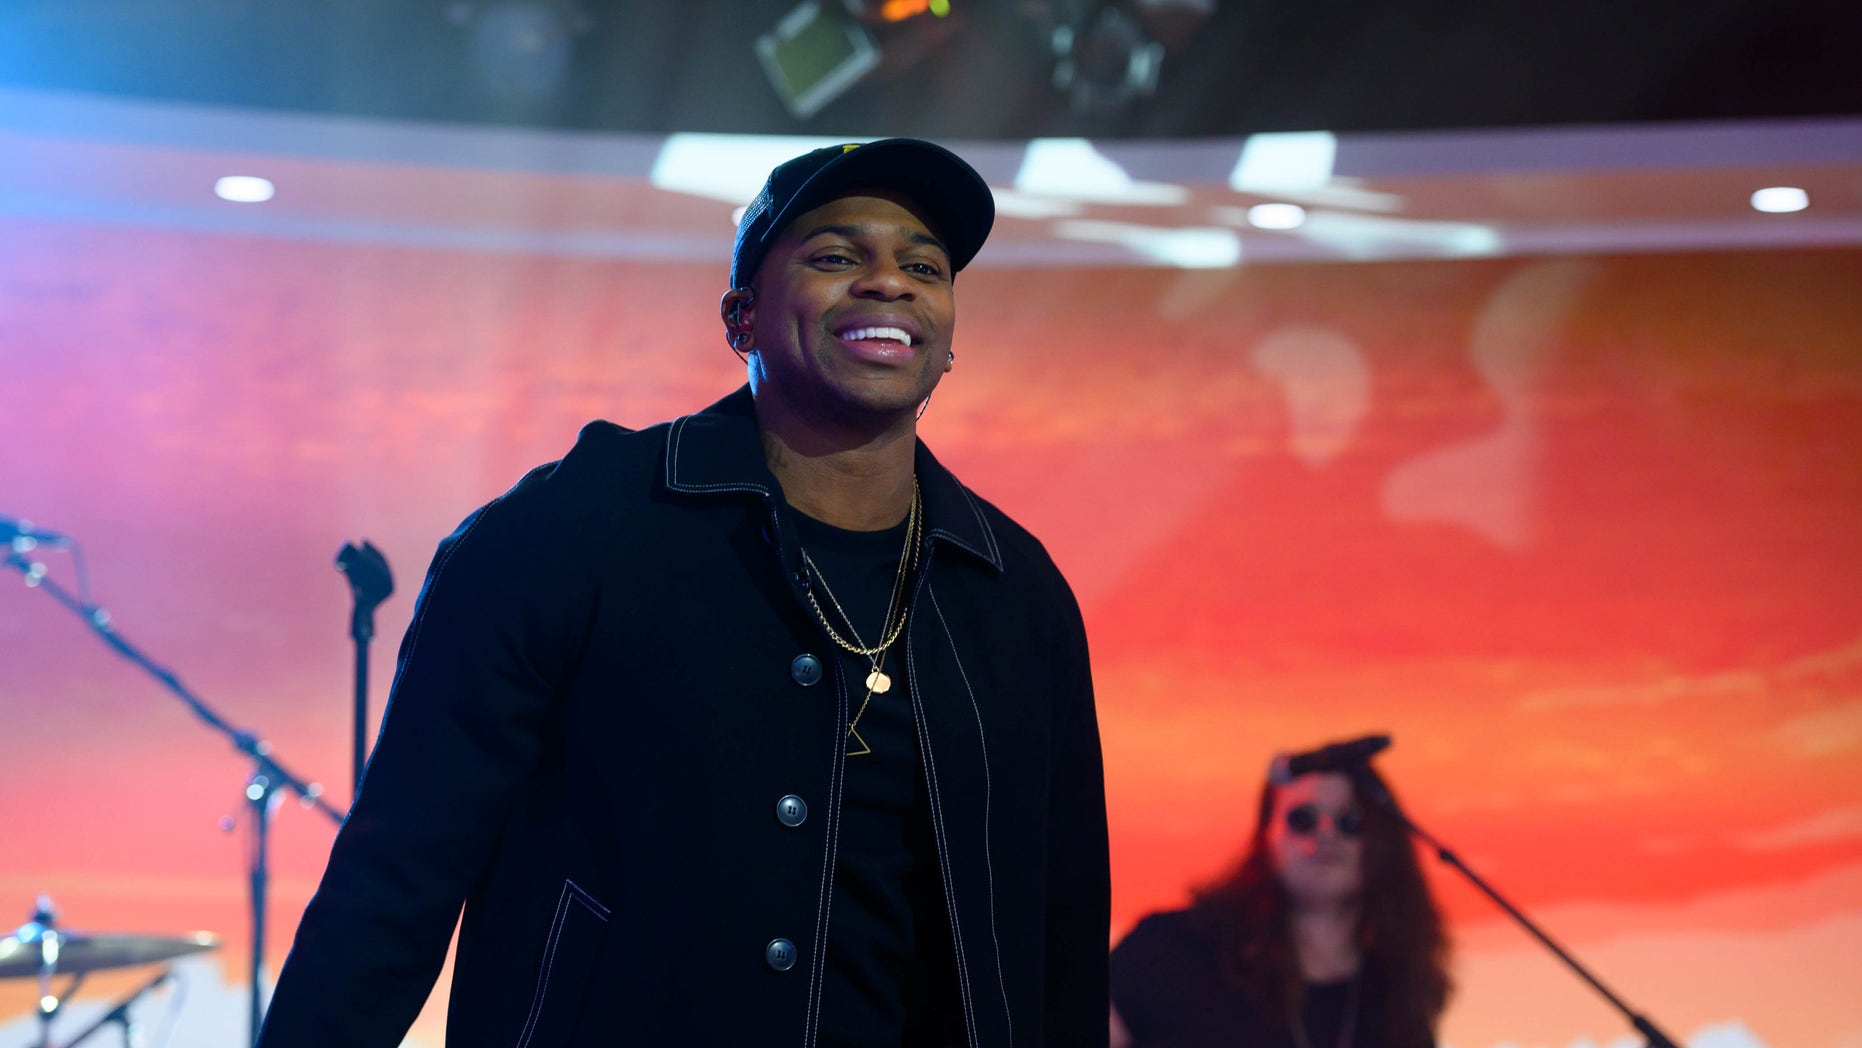 Country singer Jimmie Allen breaks up a fight at his concert, has someone kicked out